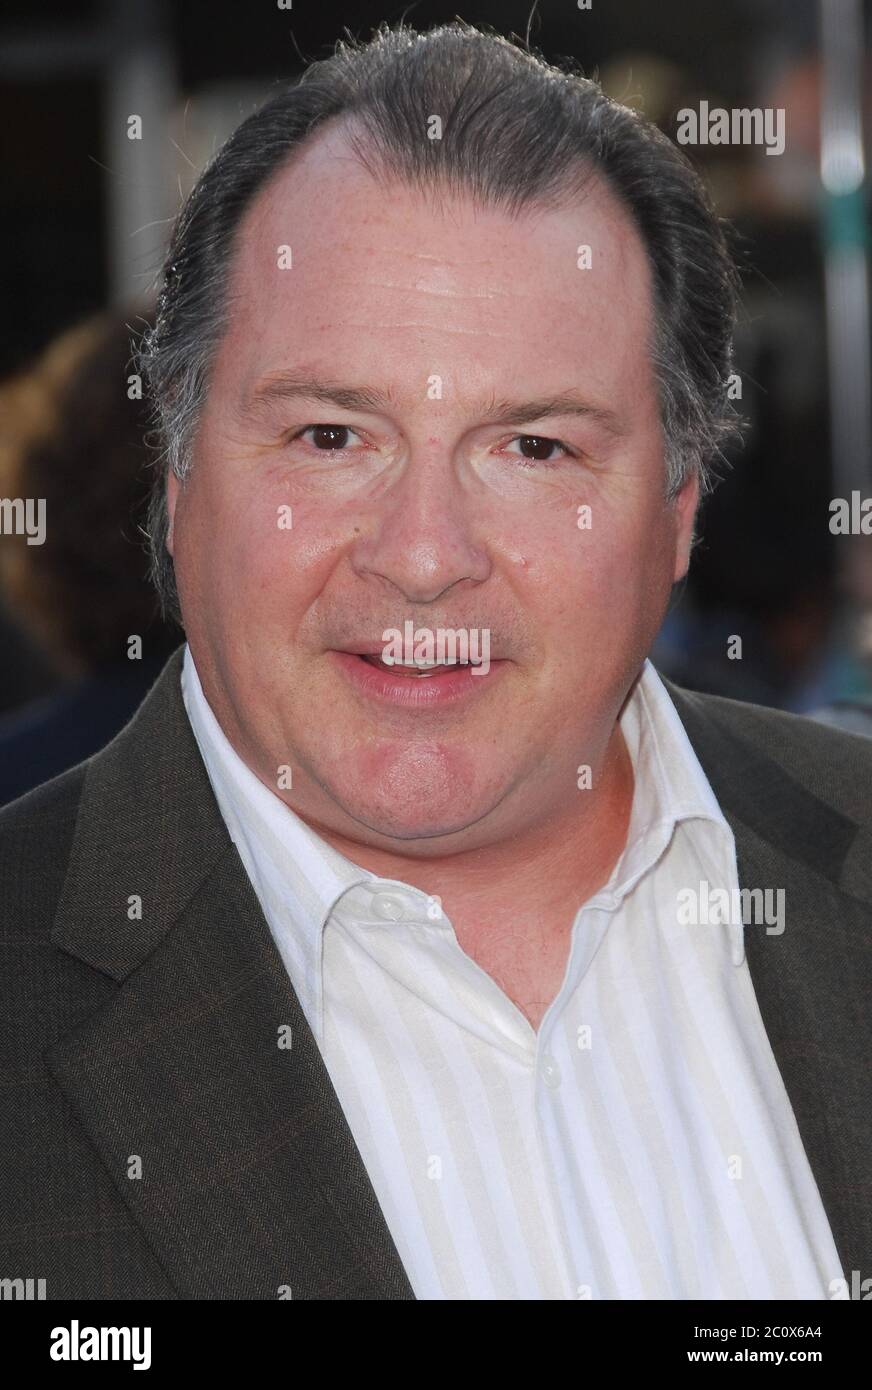 Kevin Dunn at the Los Angeles Premiere of 'Transformers' held at the Mann's Village Theatre in Los Angeles, CA. The event took place on Wednesday, June 27, 2007. Photo by: SBM / PictureLux - File Reference # 34006-6972SBMPLX Stock Photo